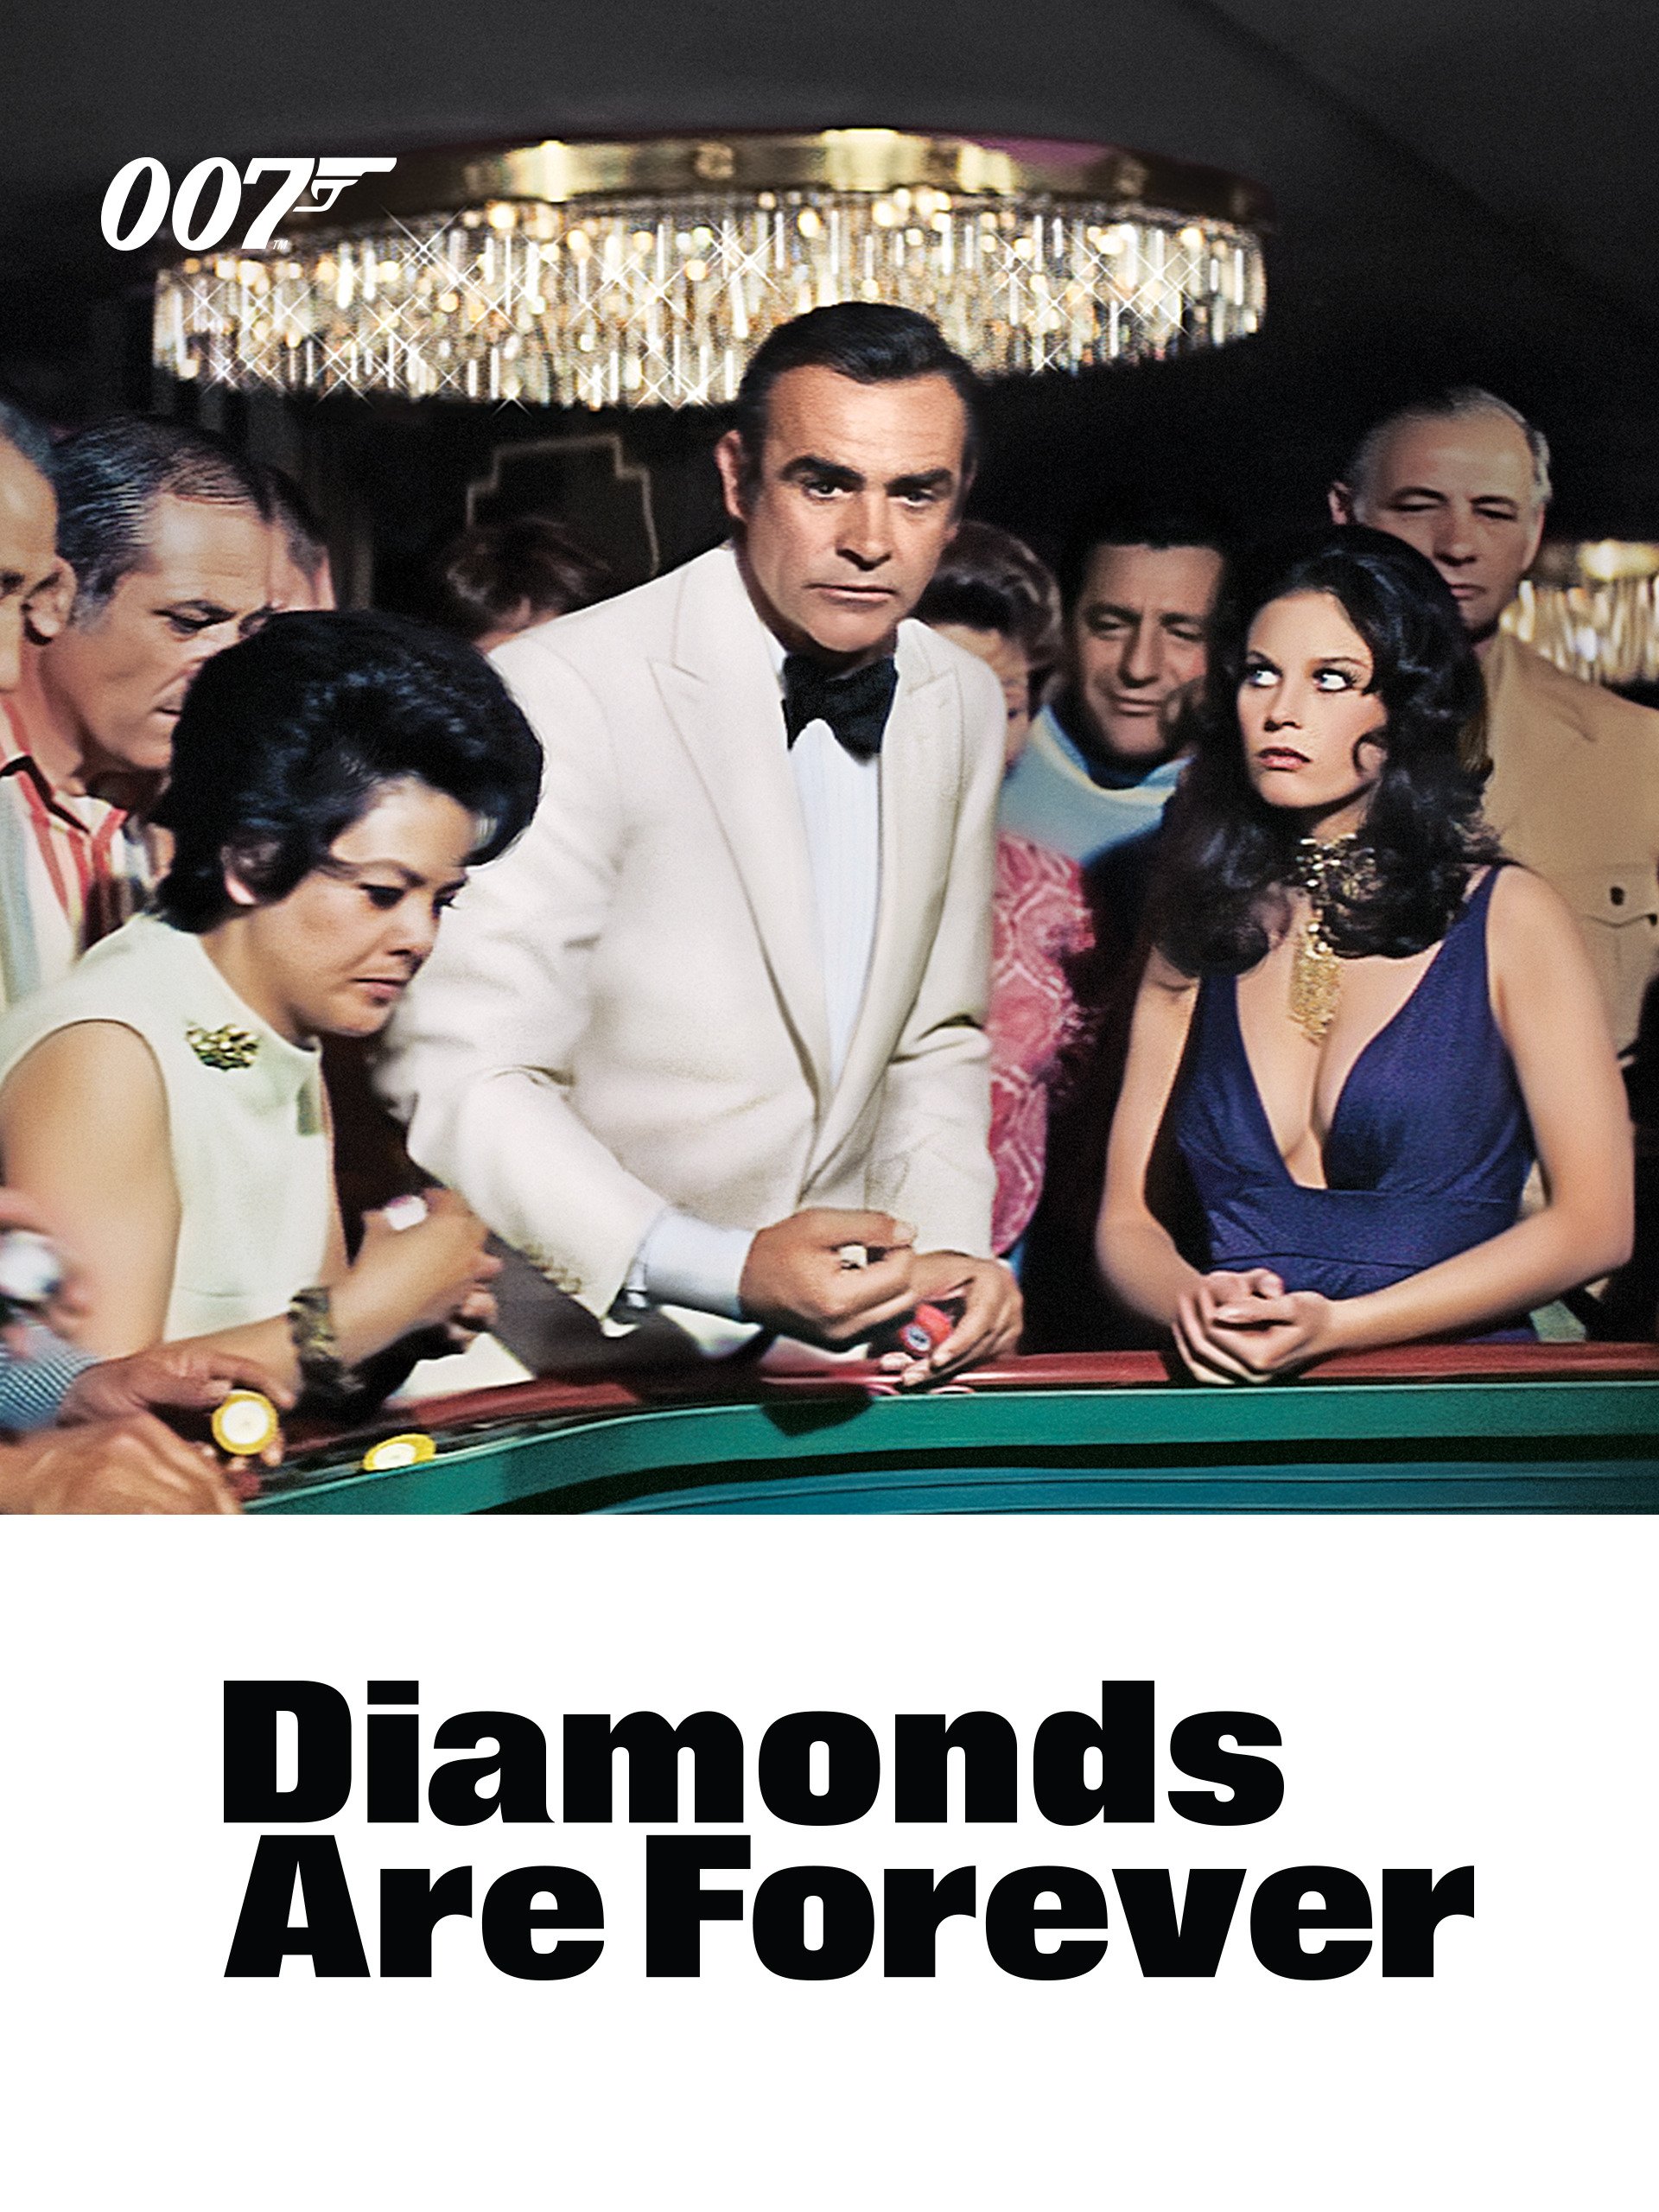 Diamonds are forever cars